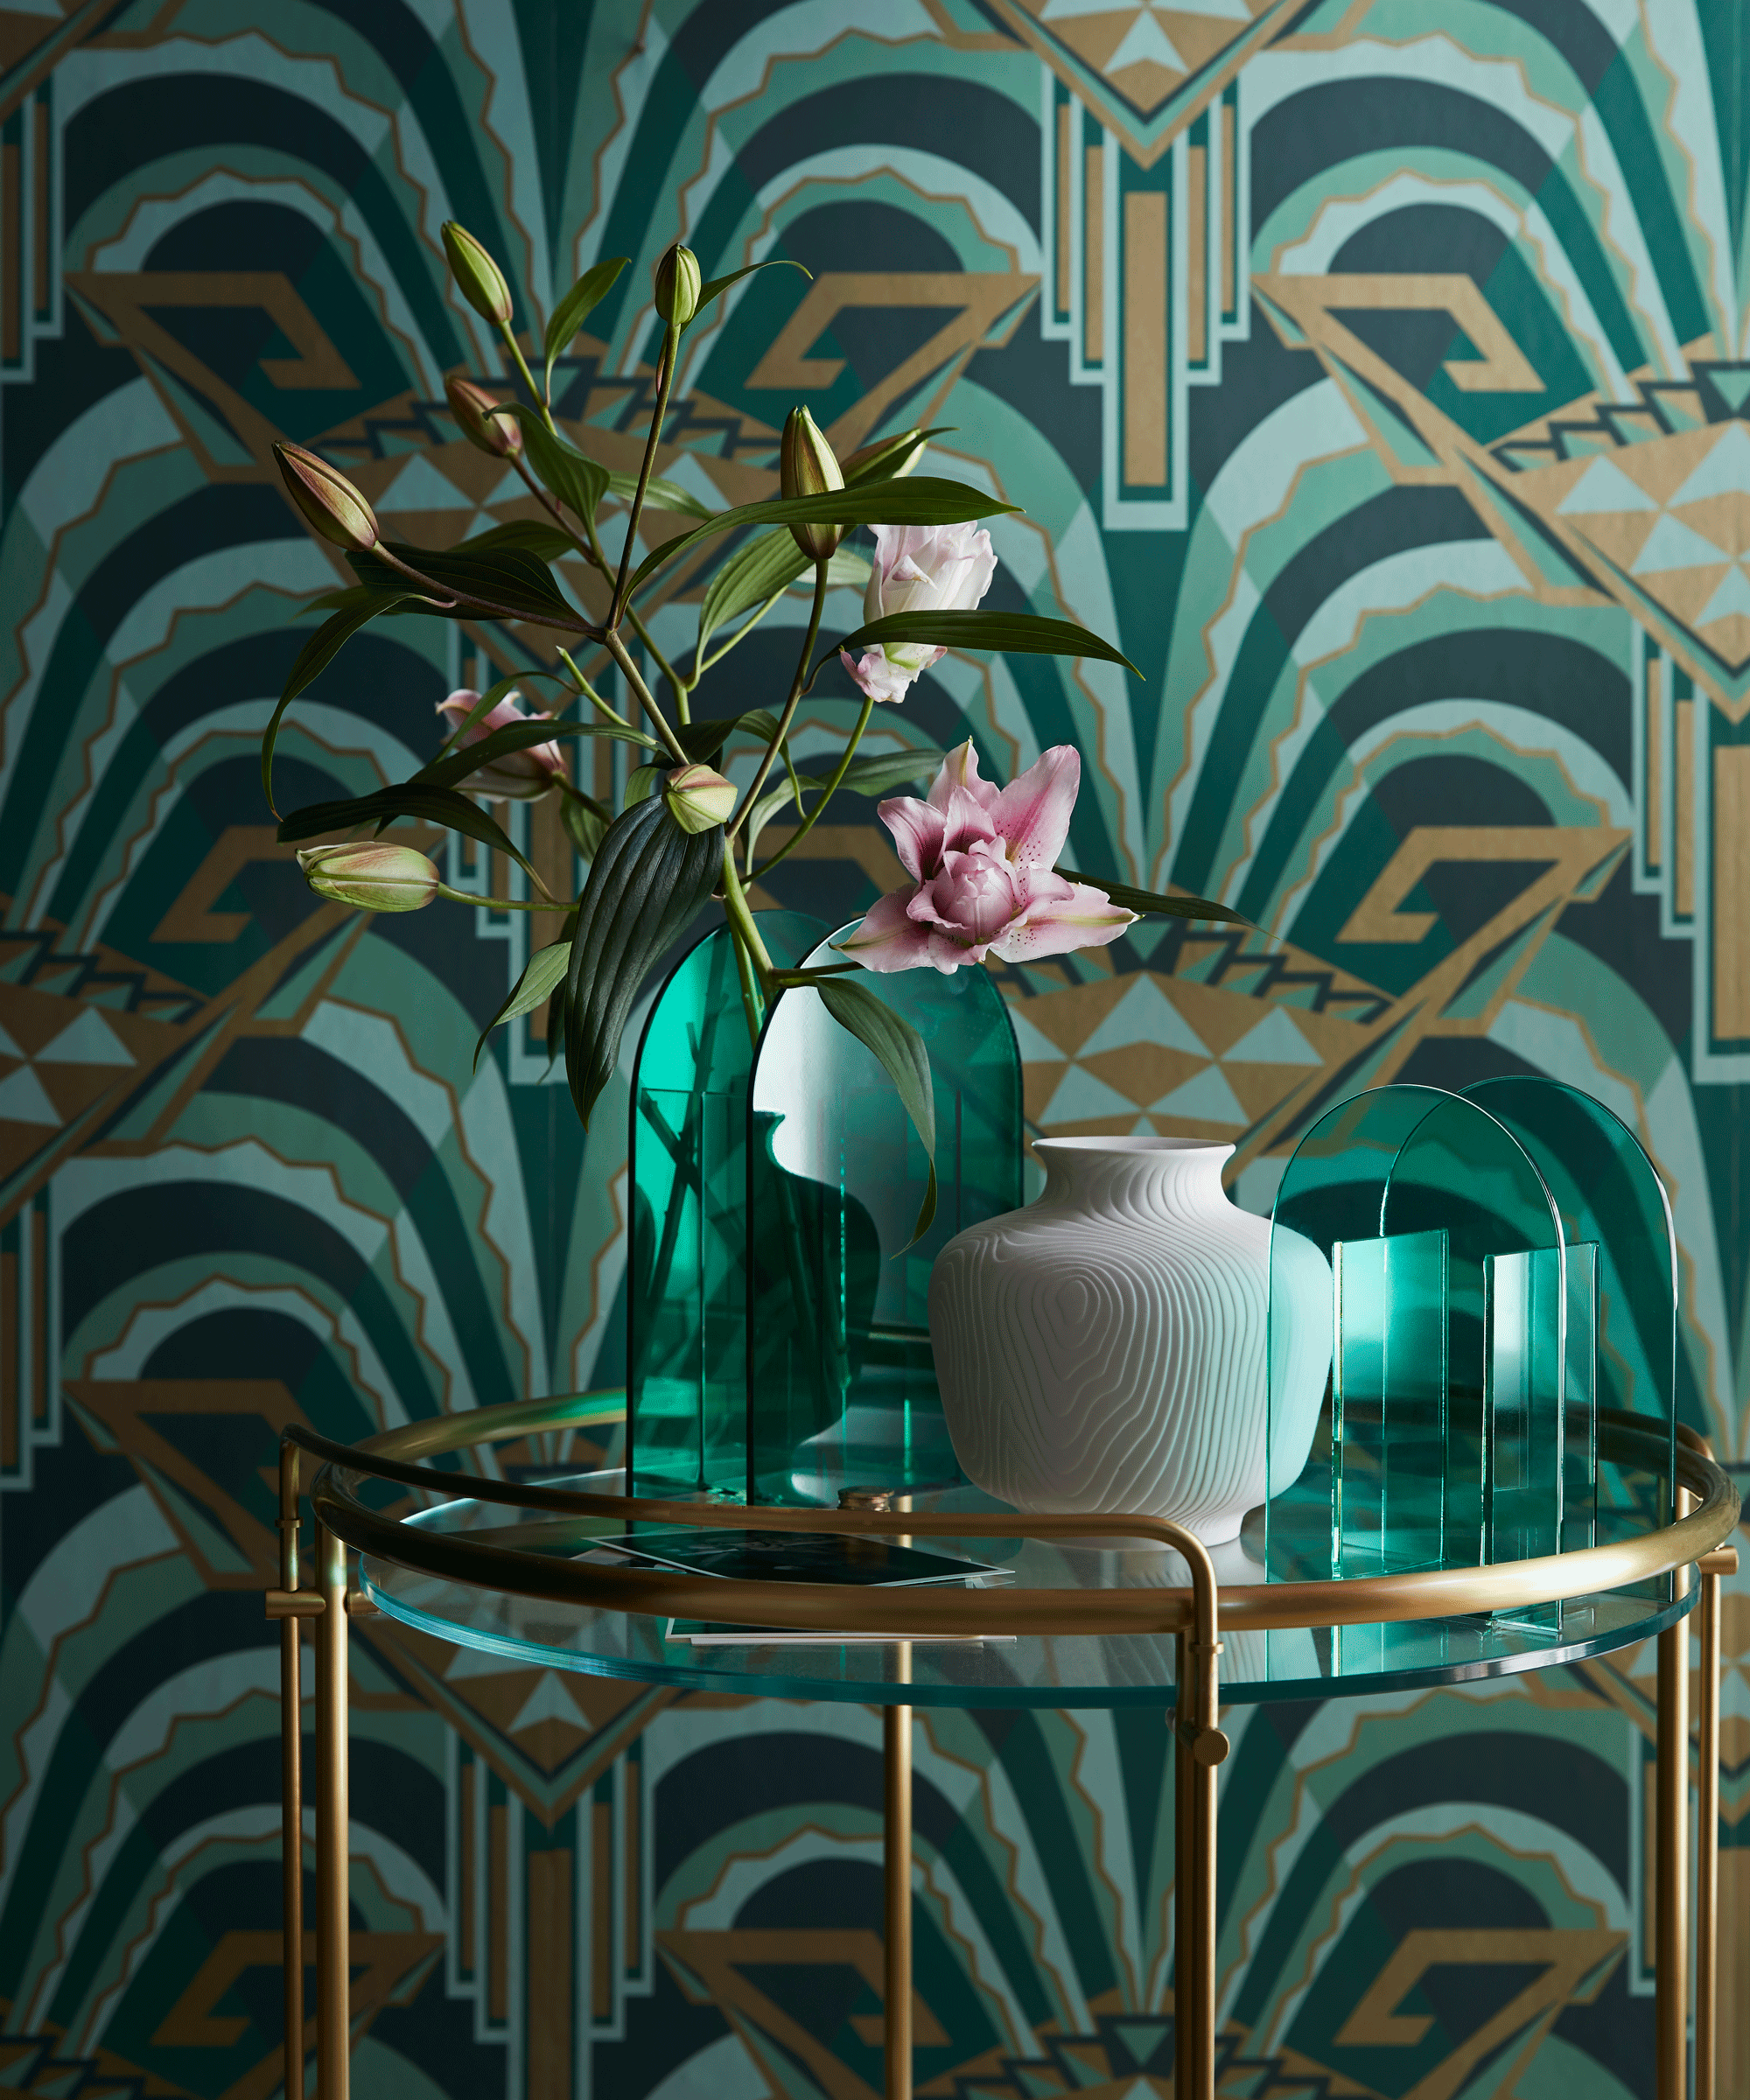 Art deco wallpaper, bold colors and patterns